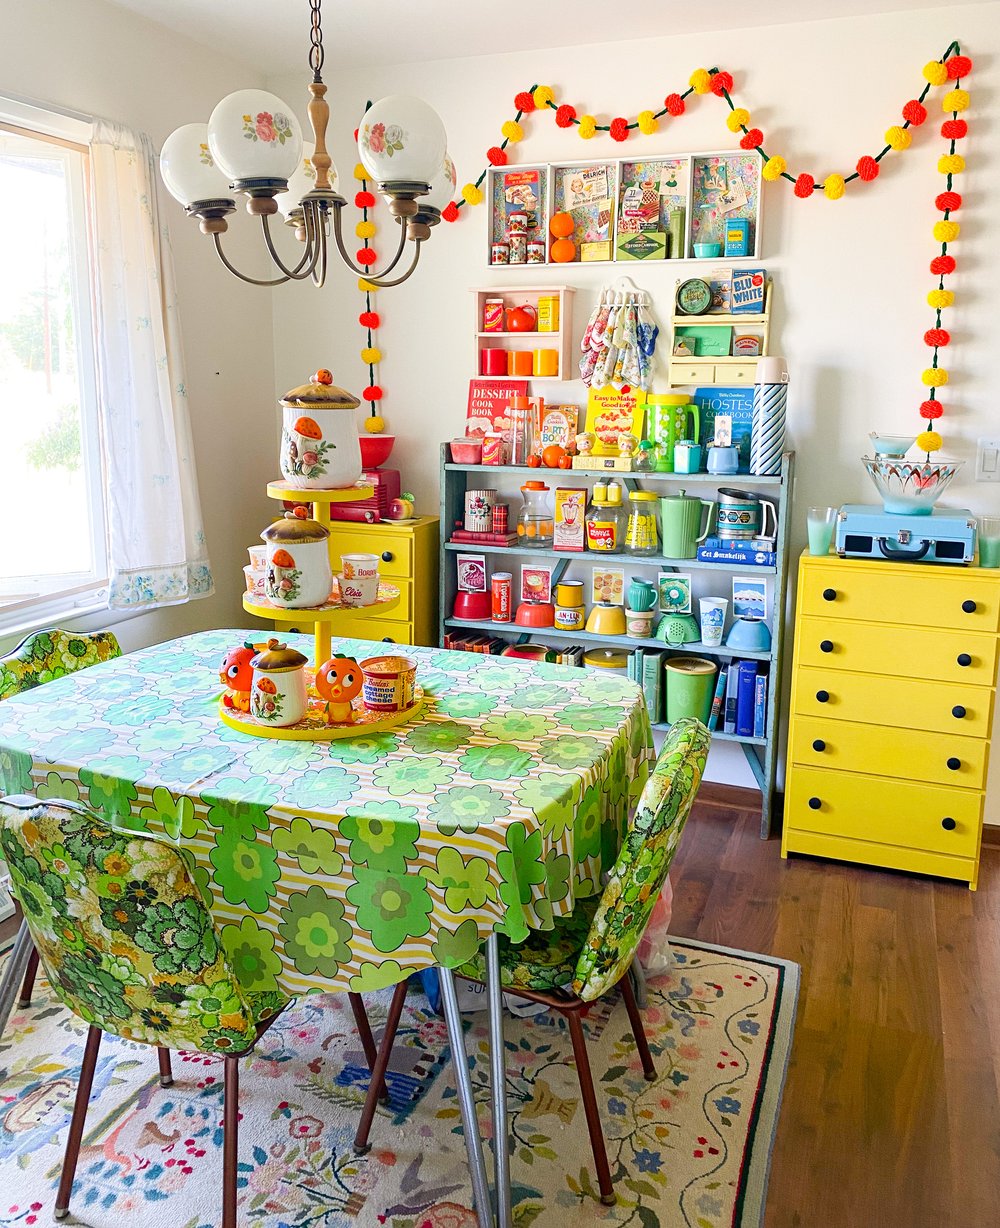 12 Sewing Projects to Reuse Fabric Scraps — Emily Retro - Vintage and DIY  Home Design